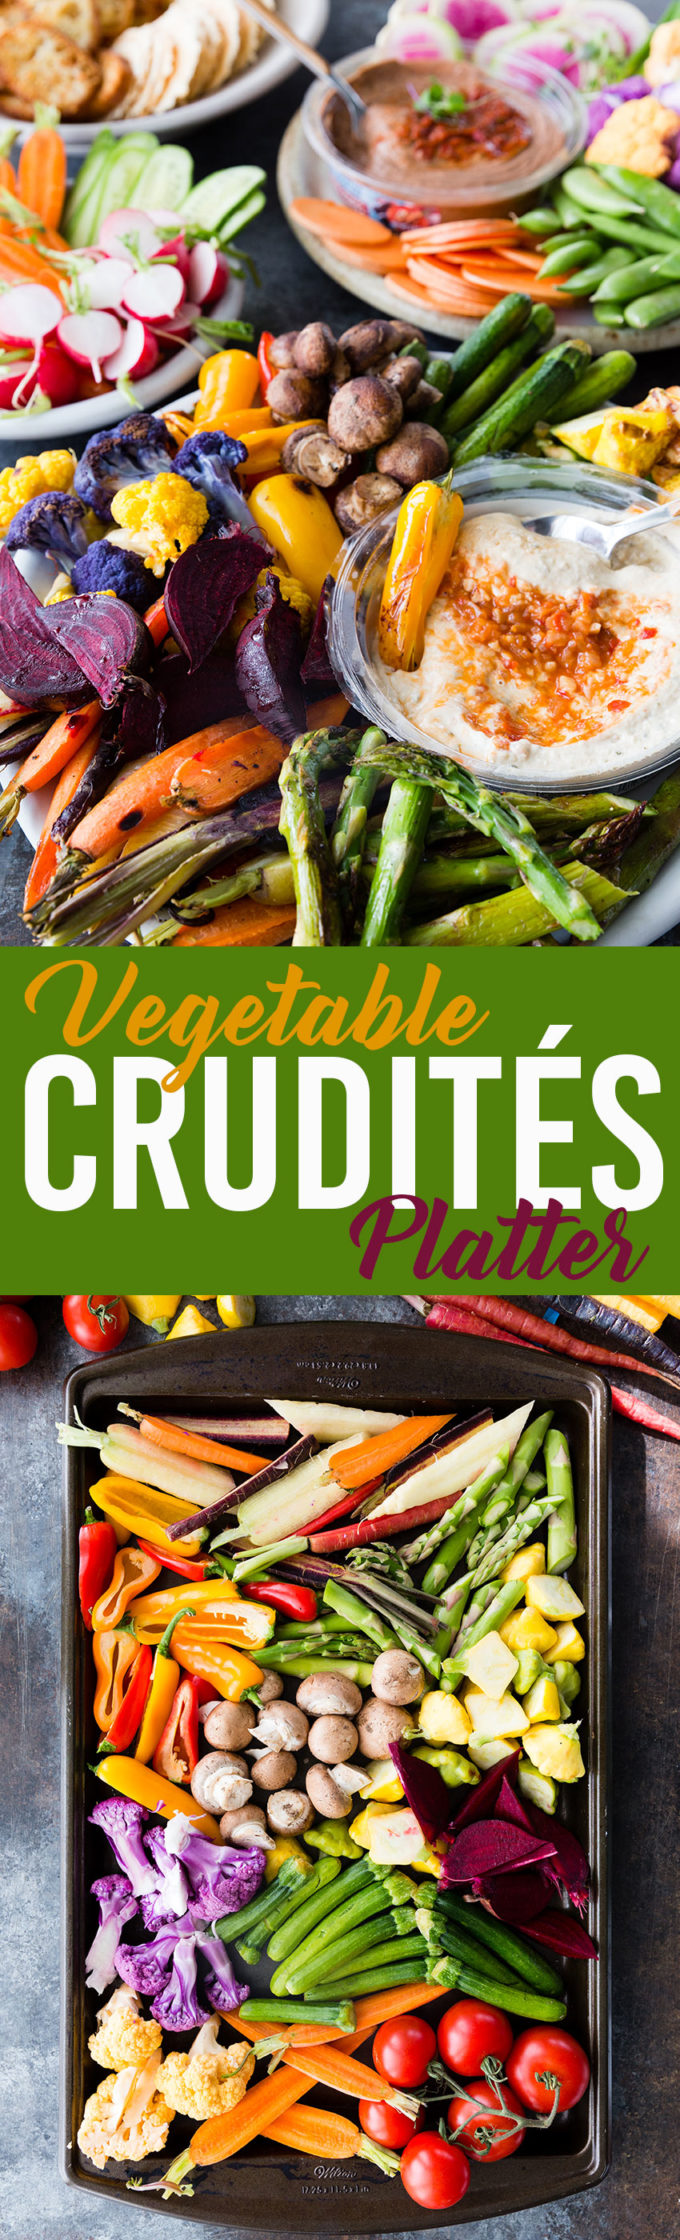 Vegetable Crudites Platter with raw and roasted vegetables and bean dip